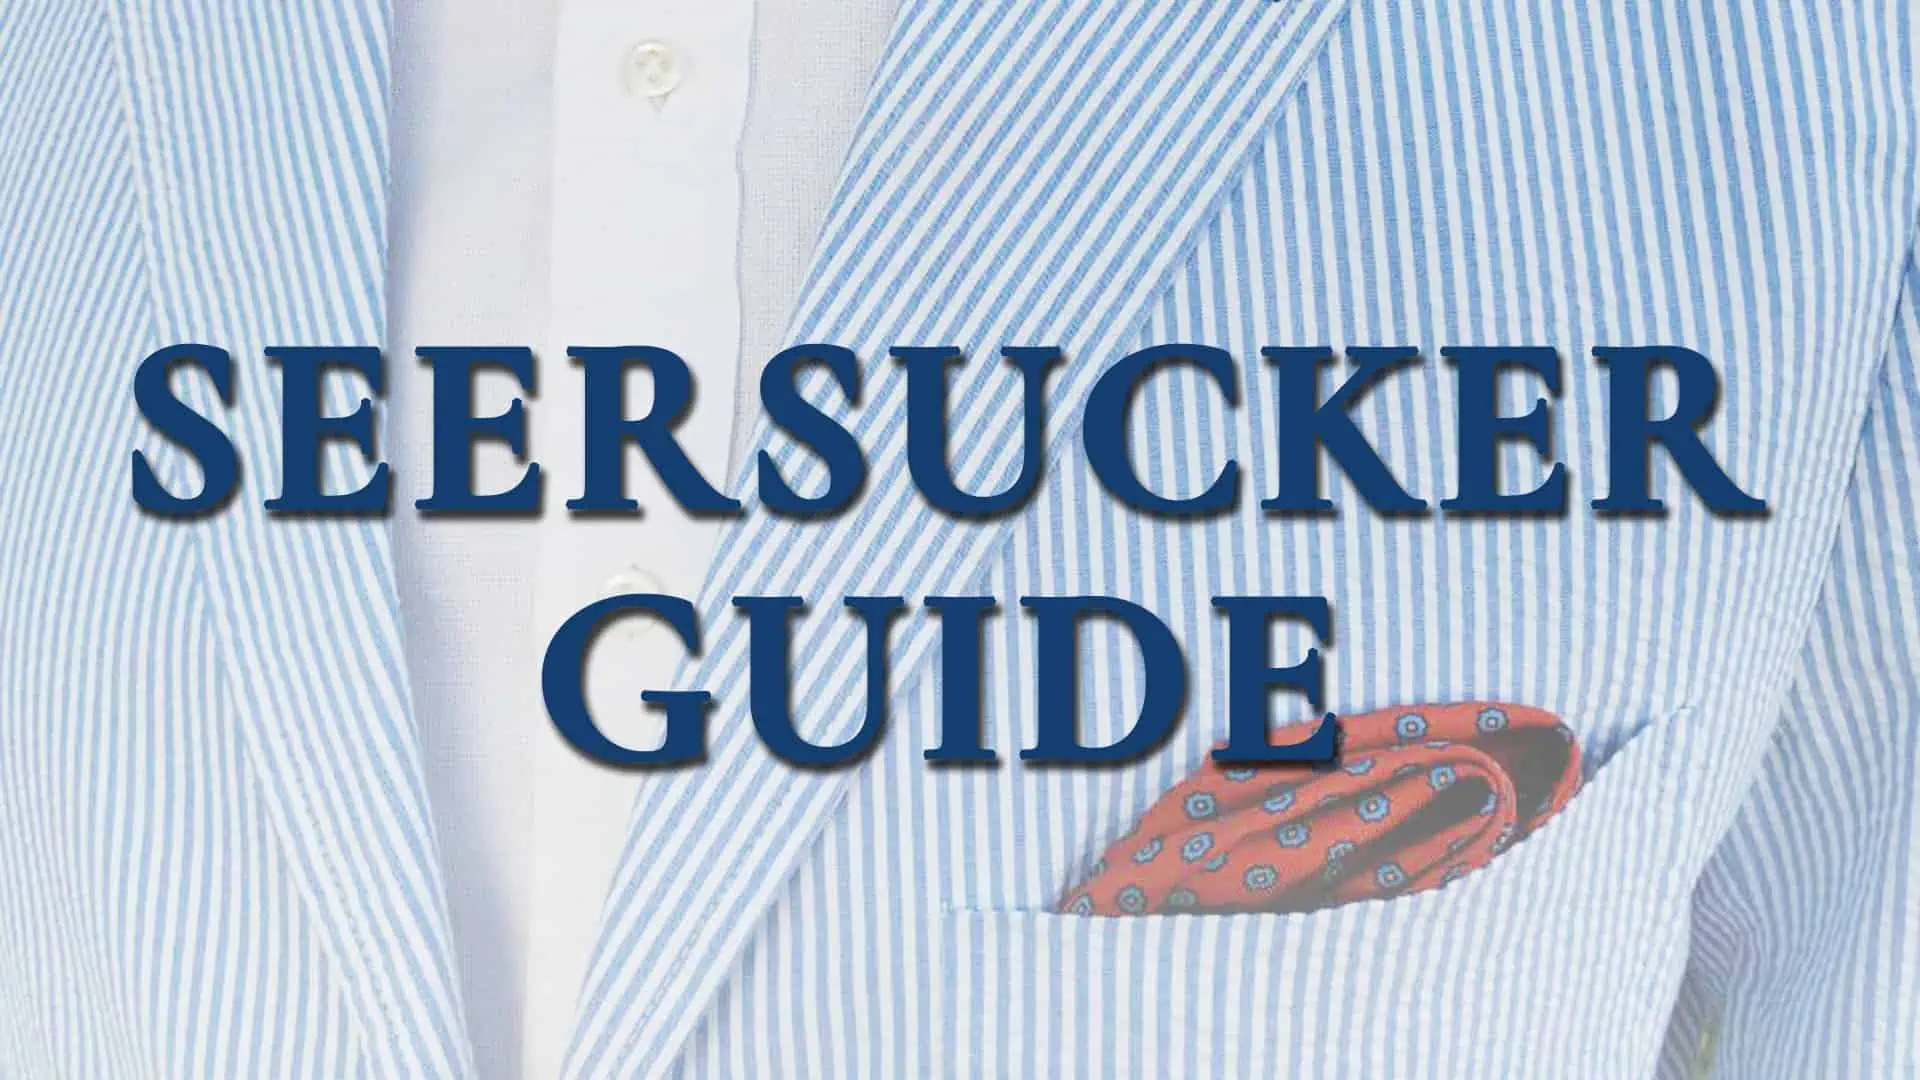 11 Tips How to Wear a Suit - Hockerty